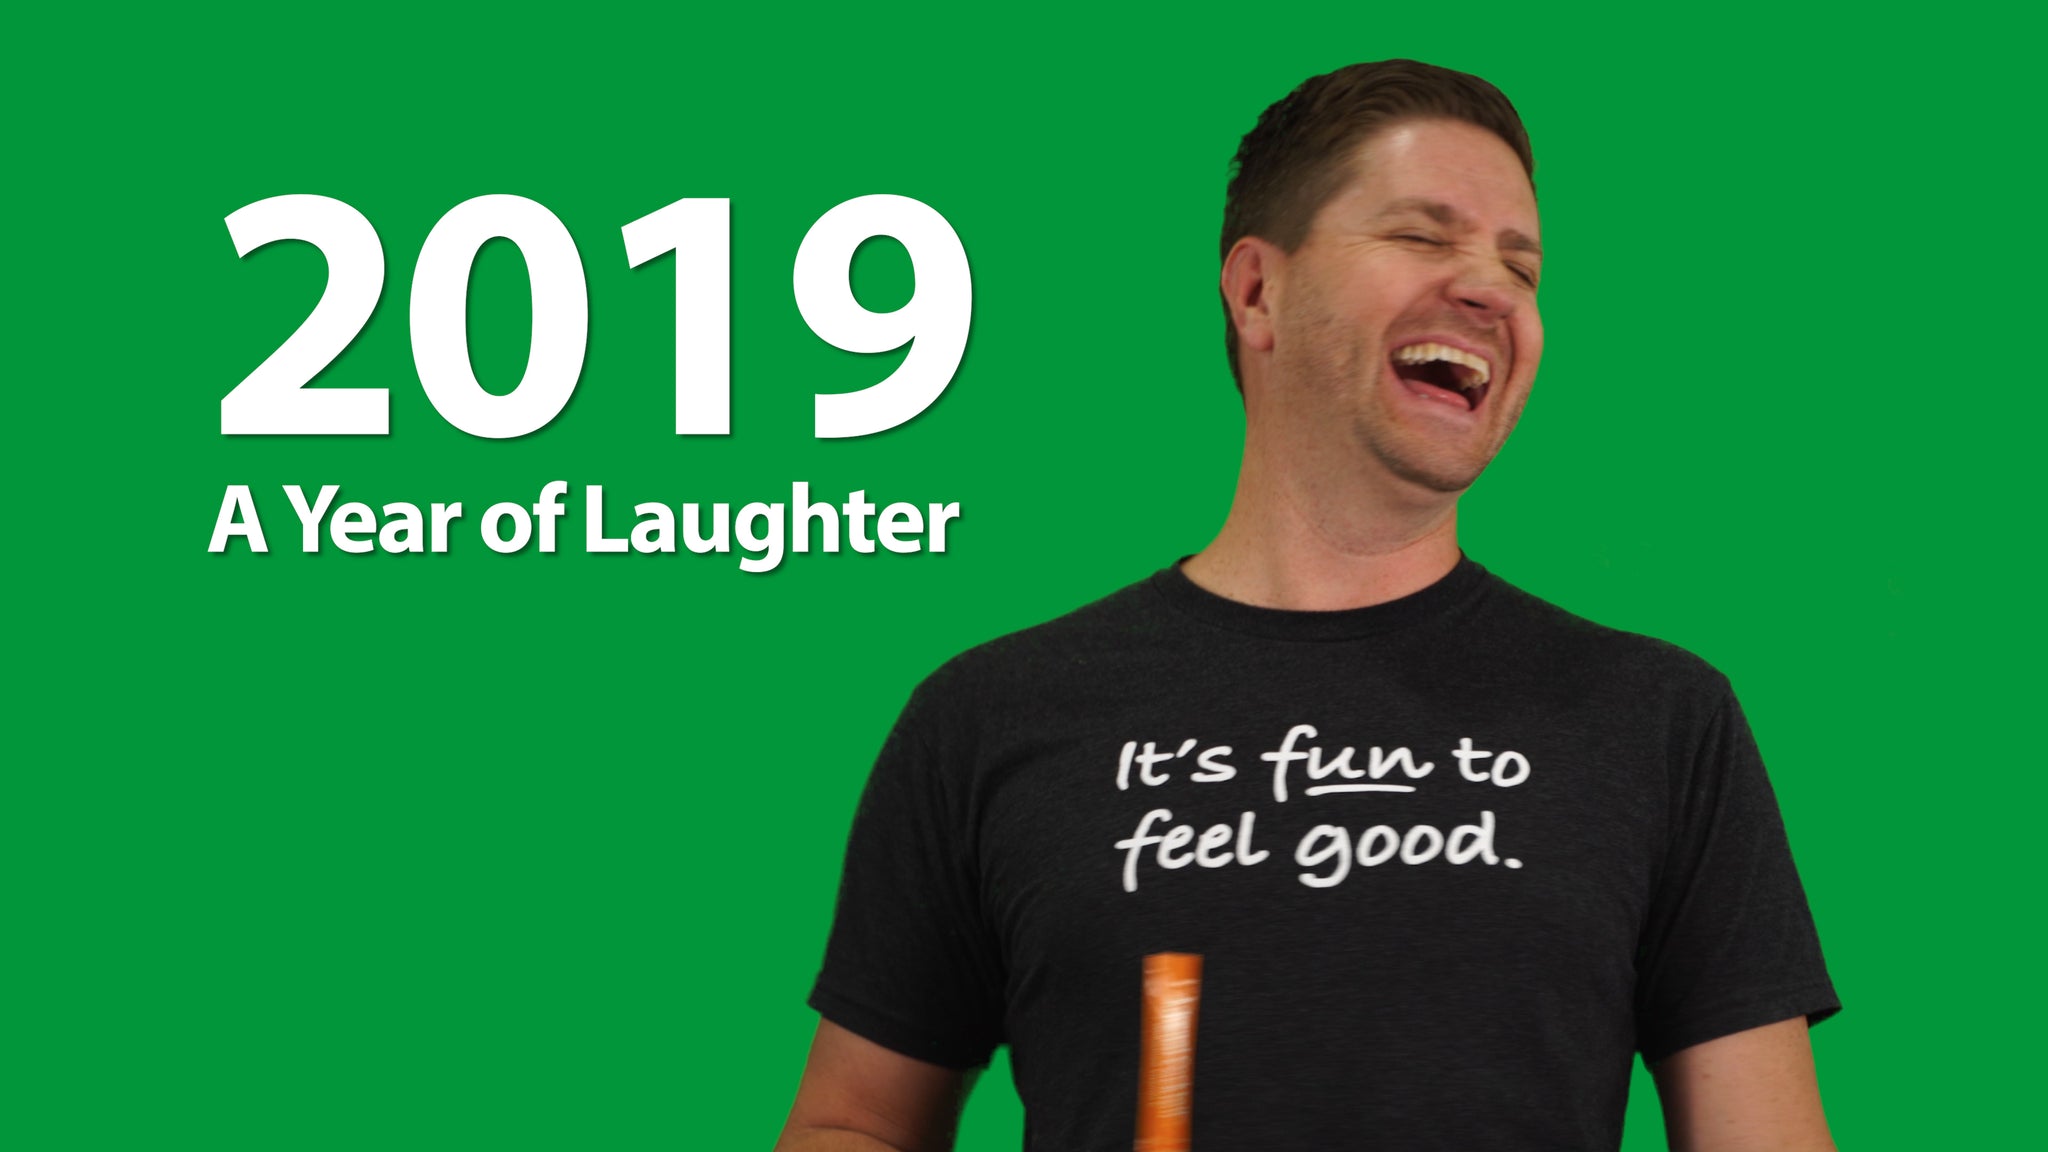 2019 A Year of Laughter